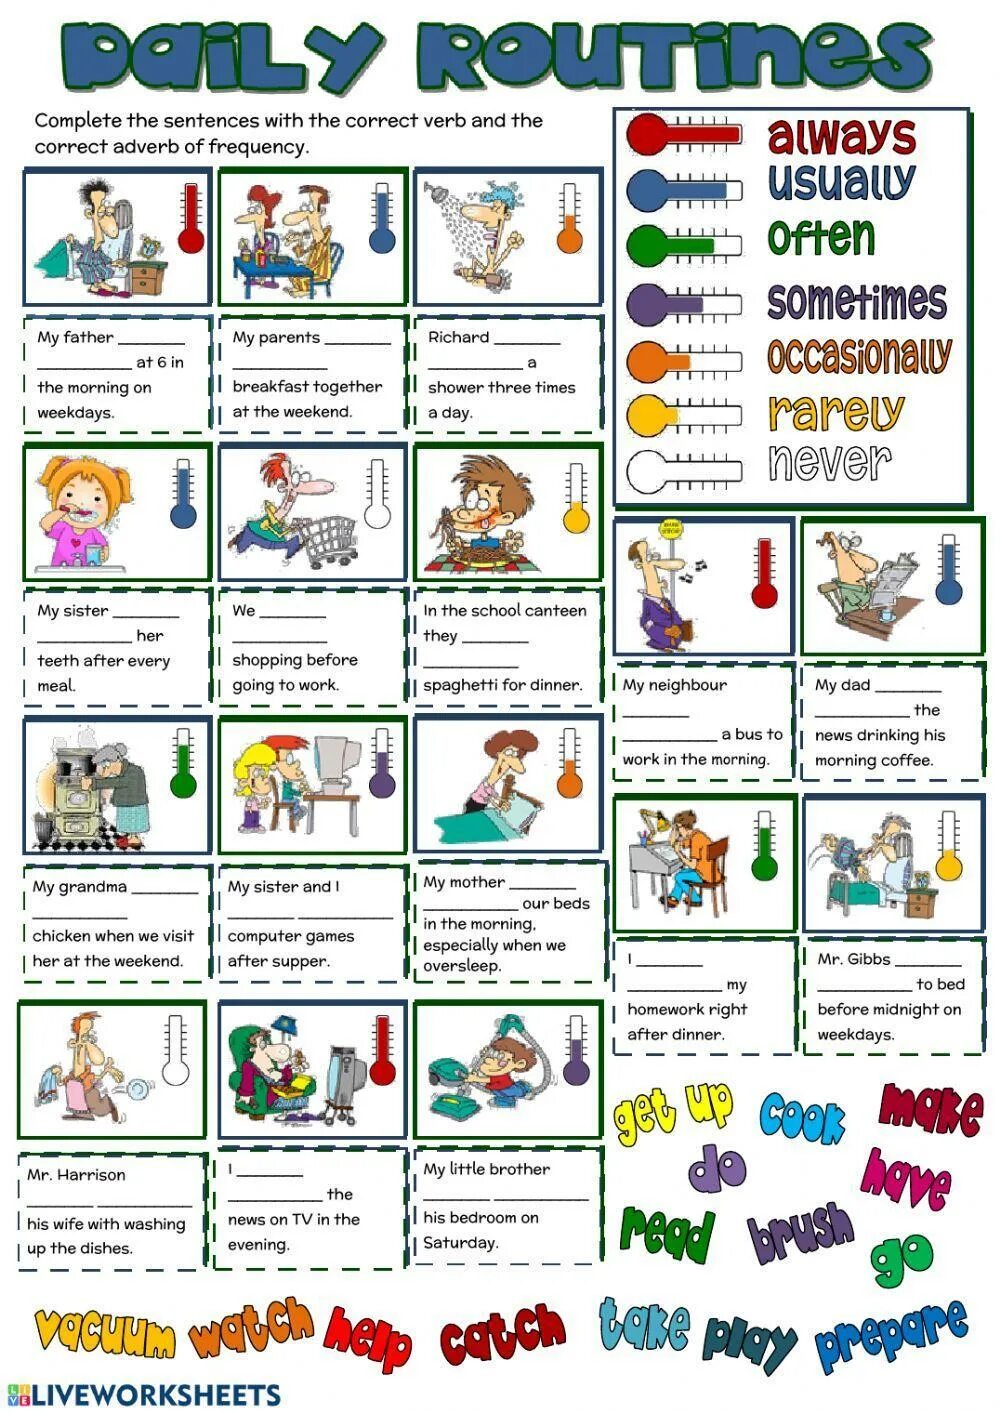 Routine exercises. Игры на Daily Routine. Упражнения Daily Routine present simple. Worksheets грамматика. Always usually sometimes never Worksheet.